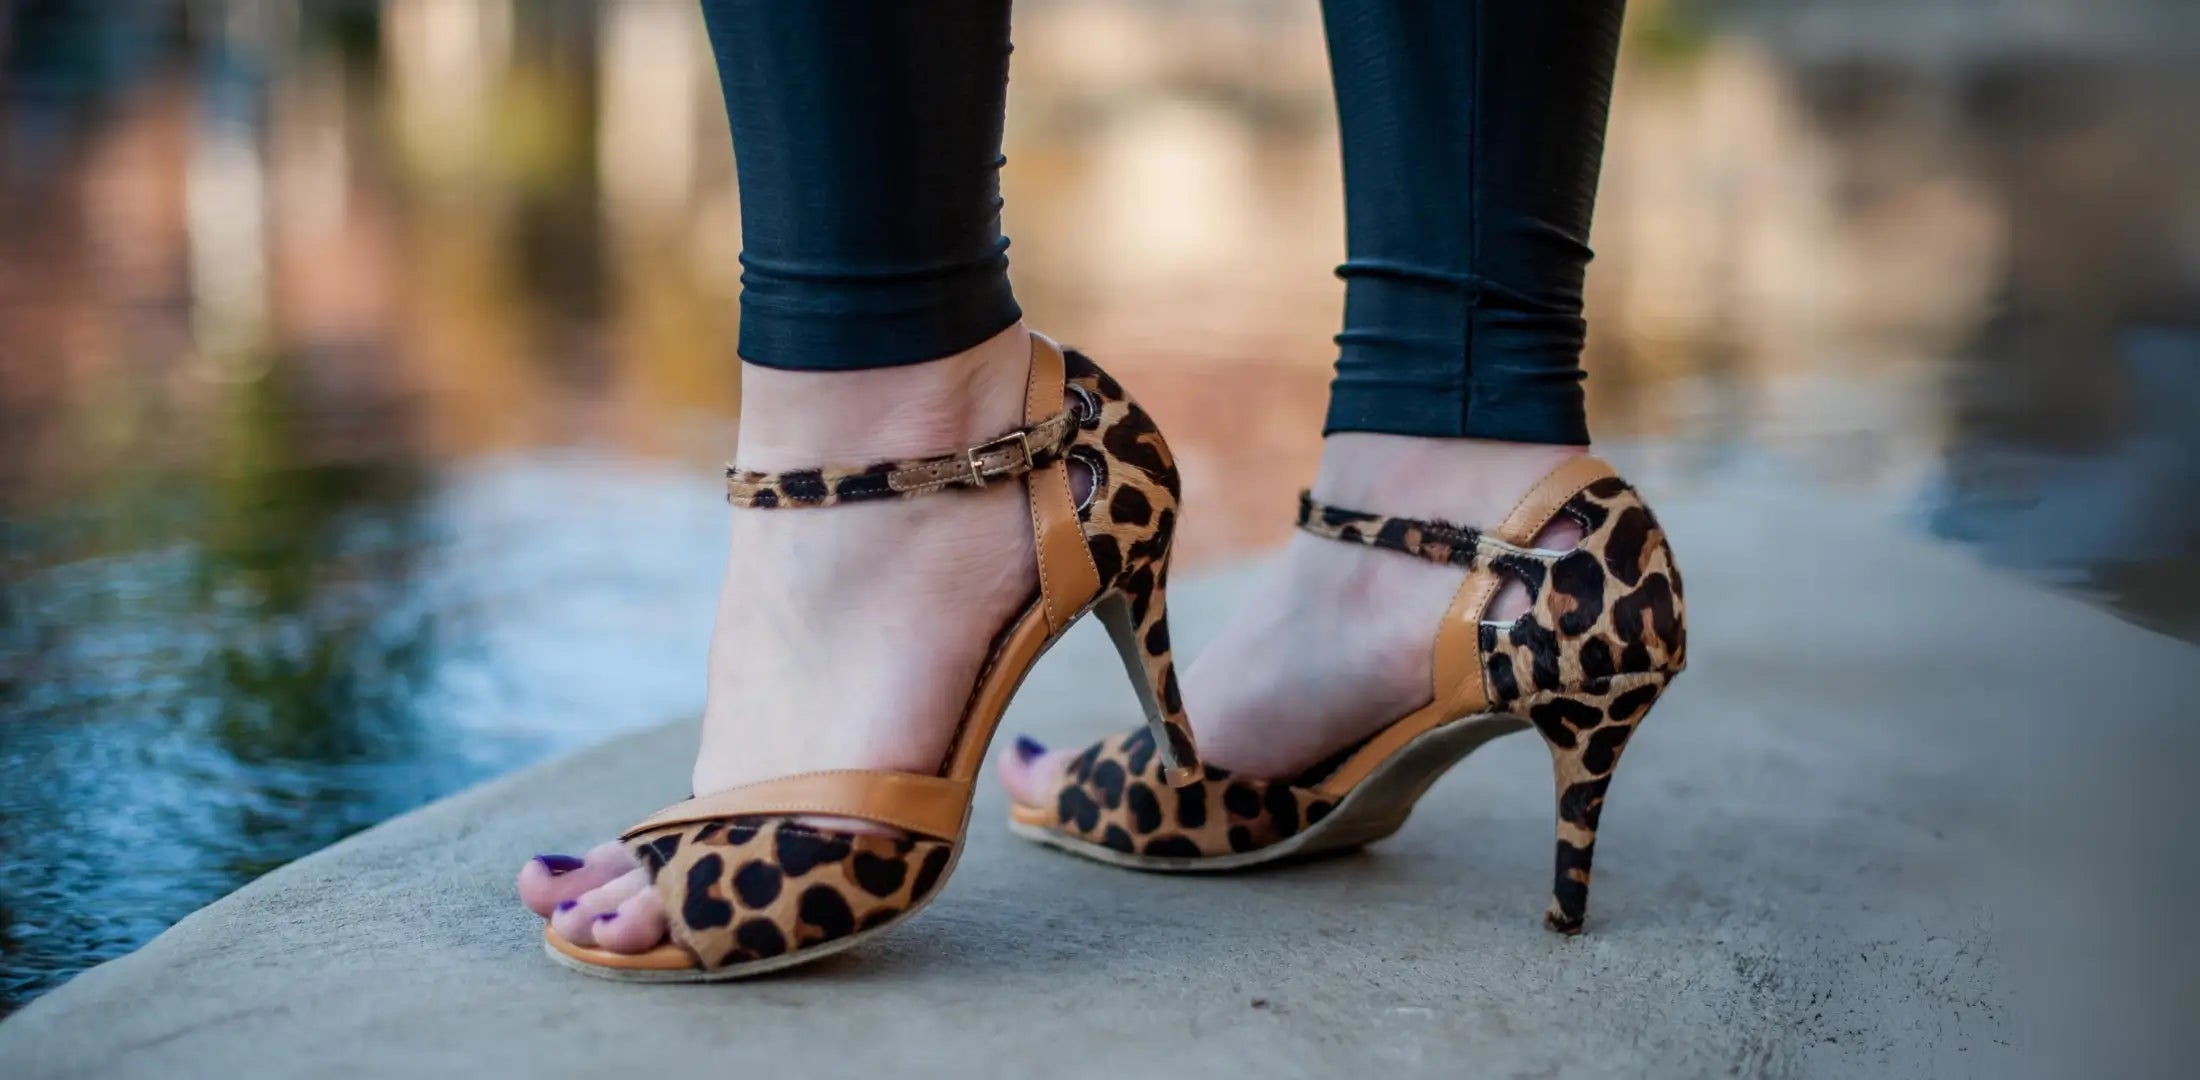 Woman standing on a ledge wearing leopard print high heel sandals with a water backdrop.